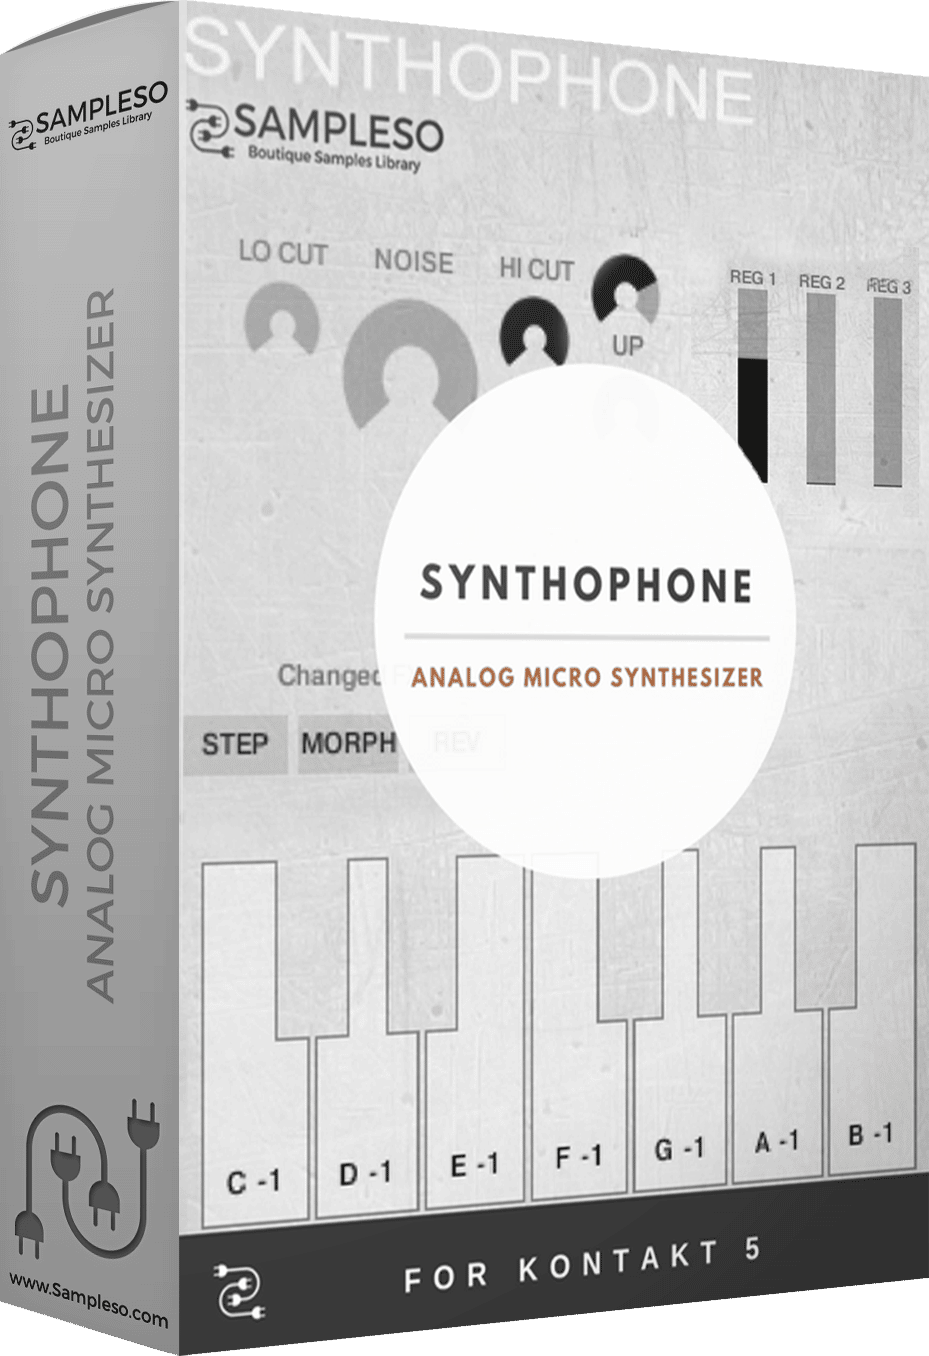 71% off “Synthophone” by Sampleso